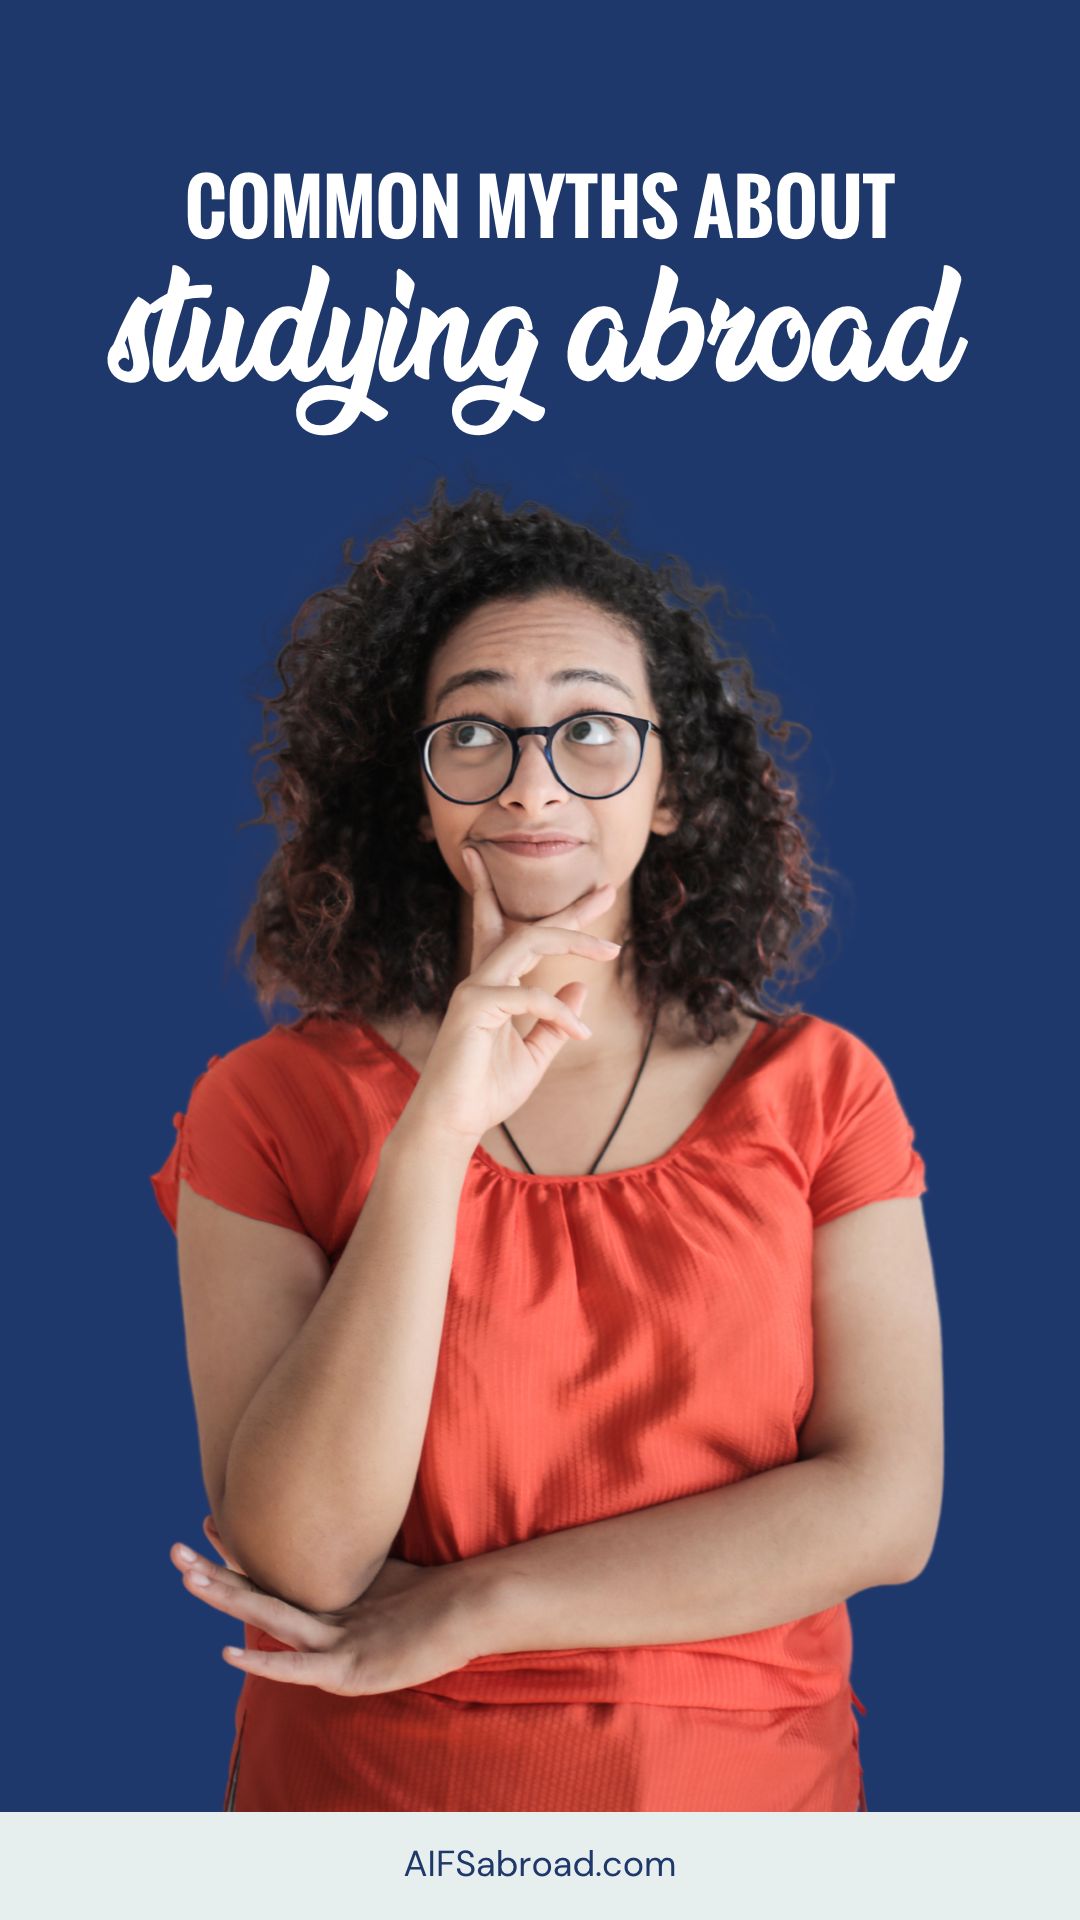 Pin image: Young woman with curly hair thinking with text that says "common myths about studying abroad"